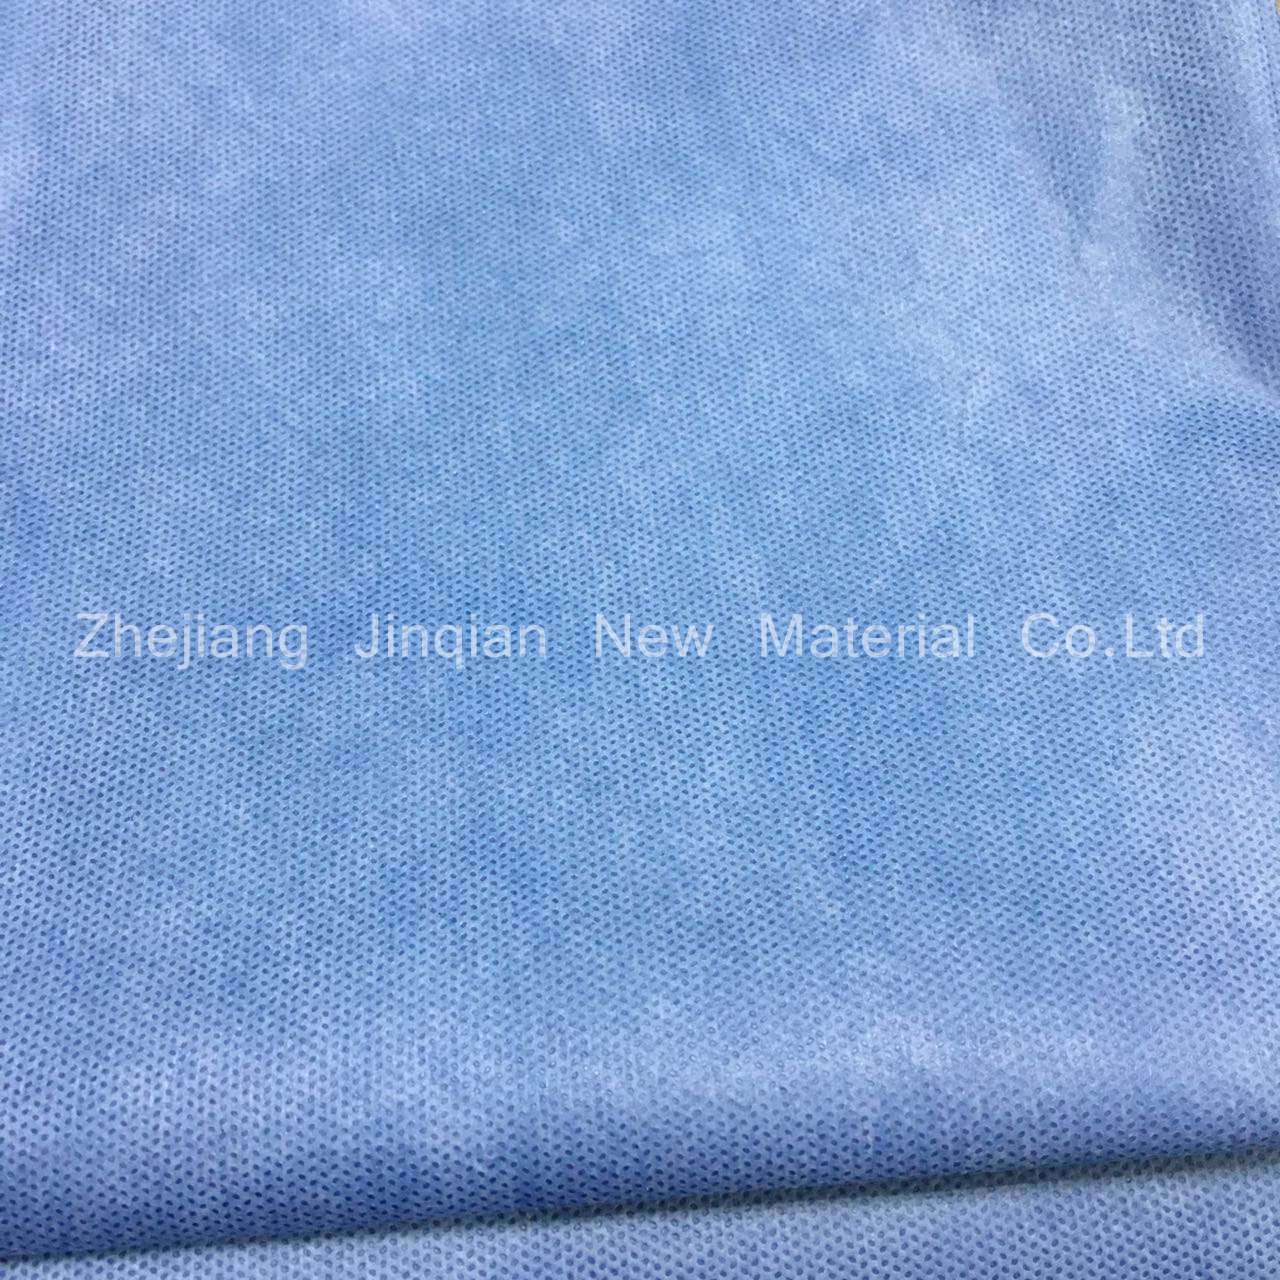 SMS Nonwoven Fabric Use for Disposable Surgical Gown